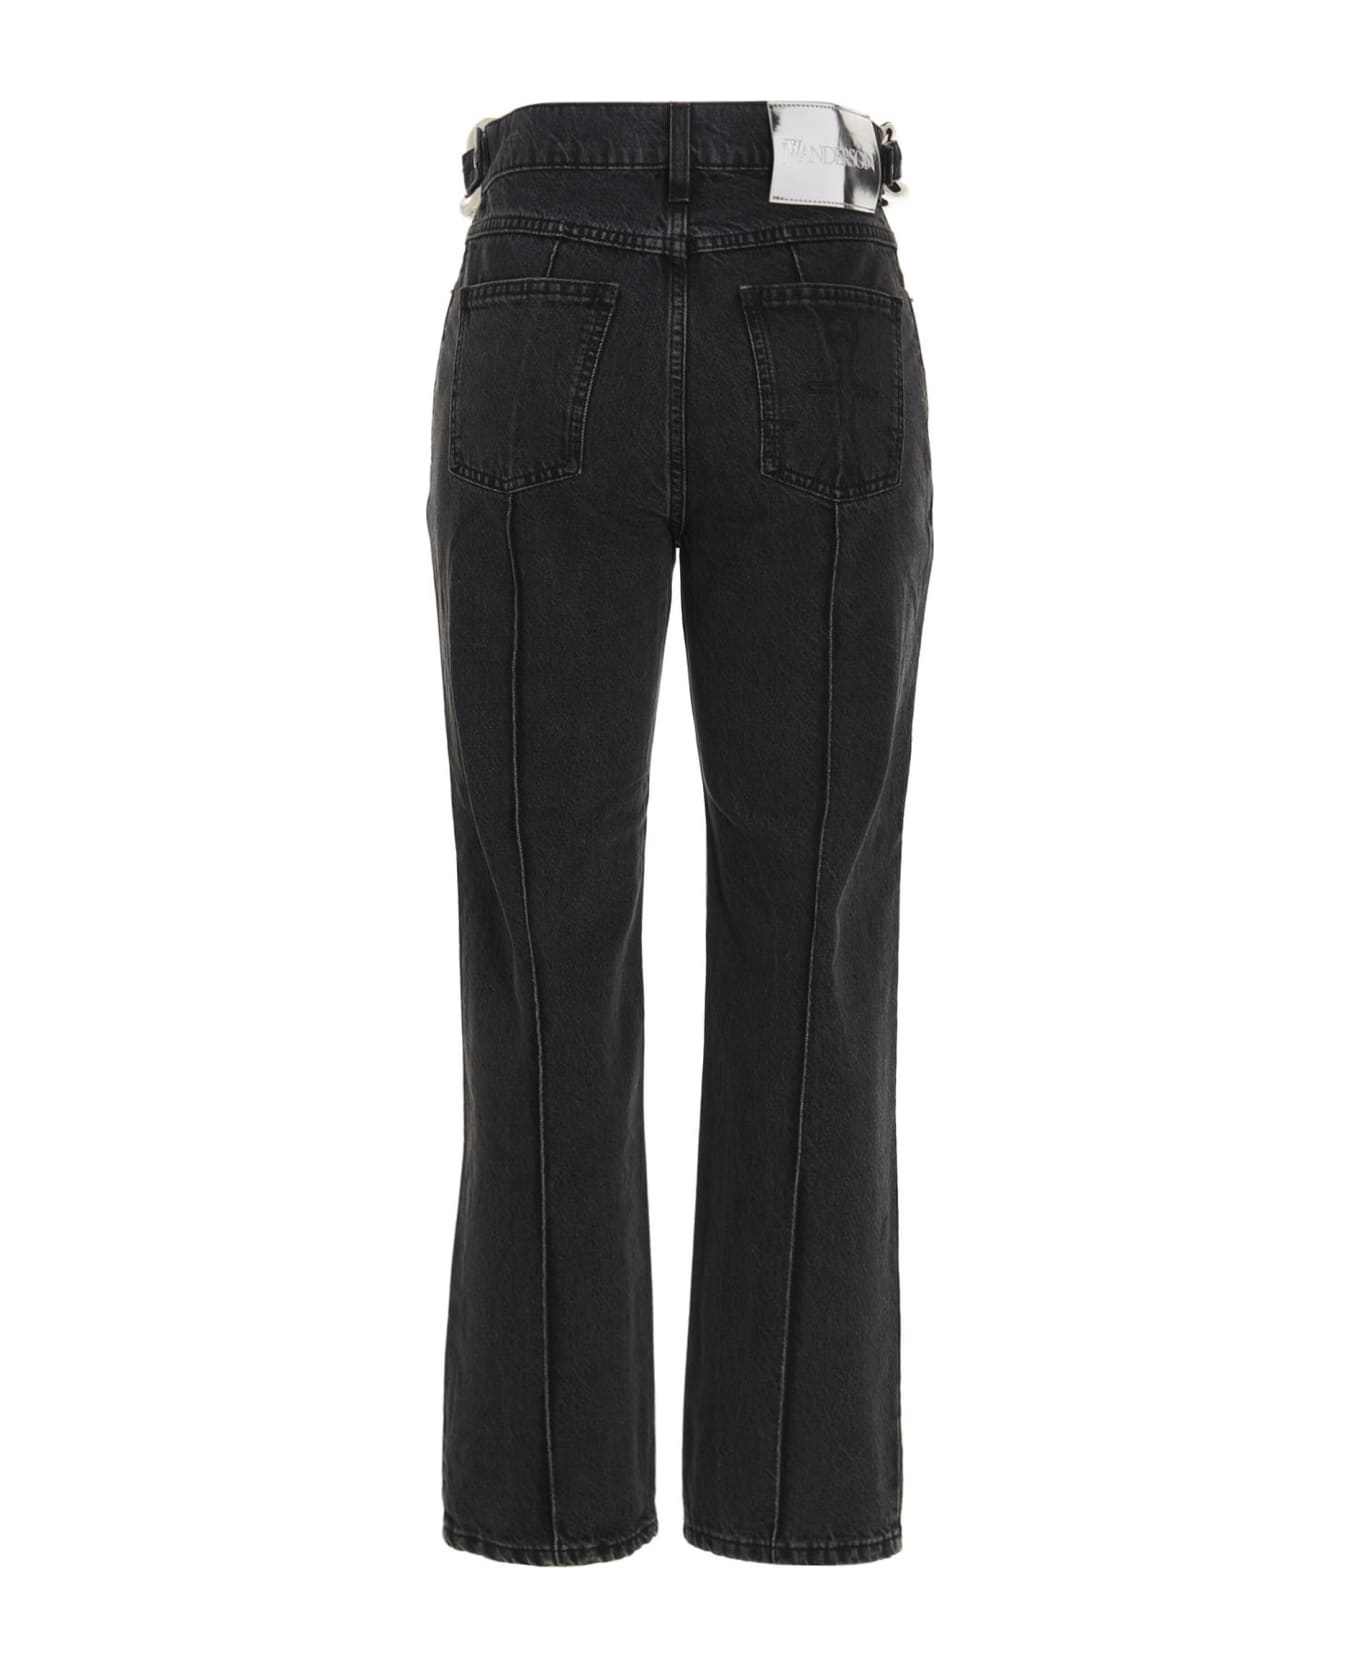 J.W. Anderson 'chain Link' Jeans - BLACK